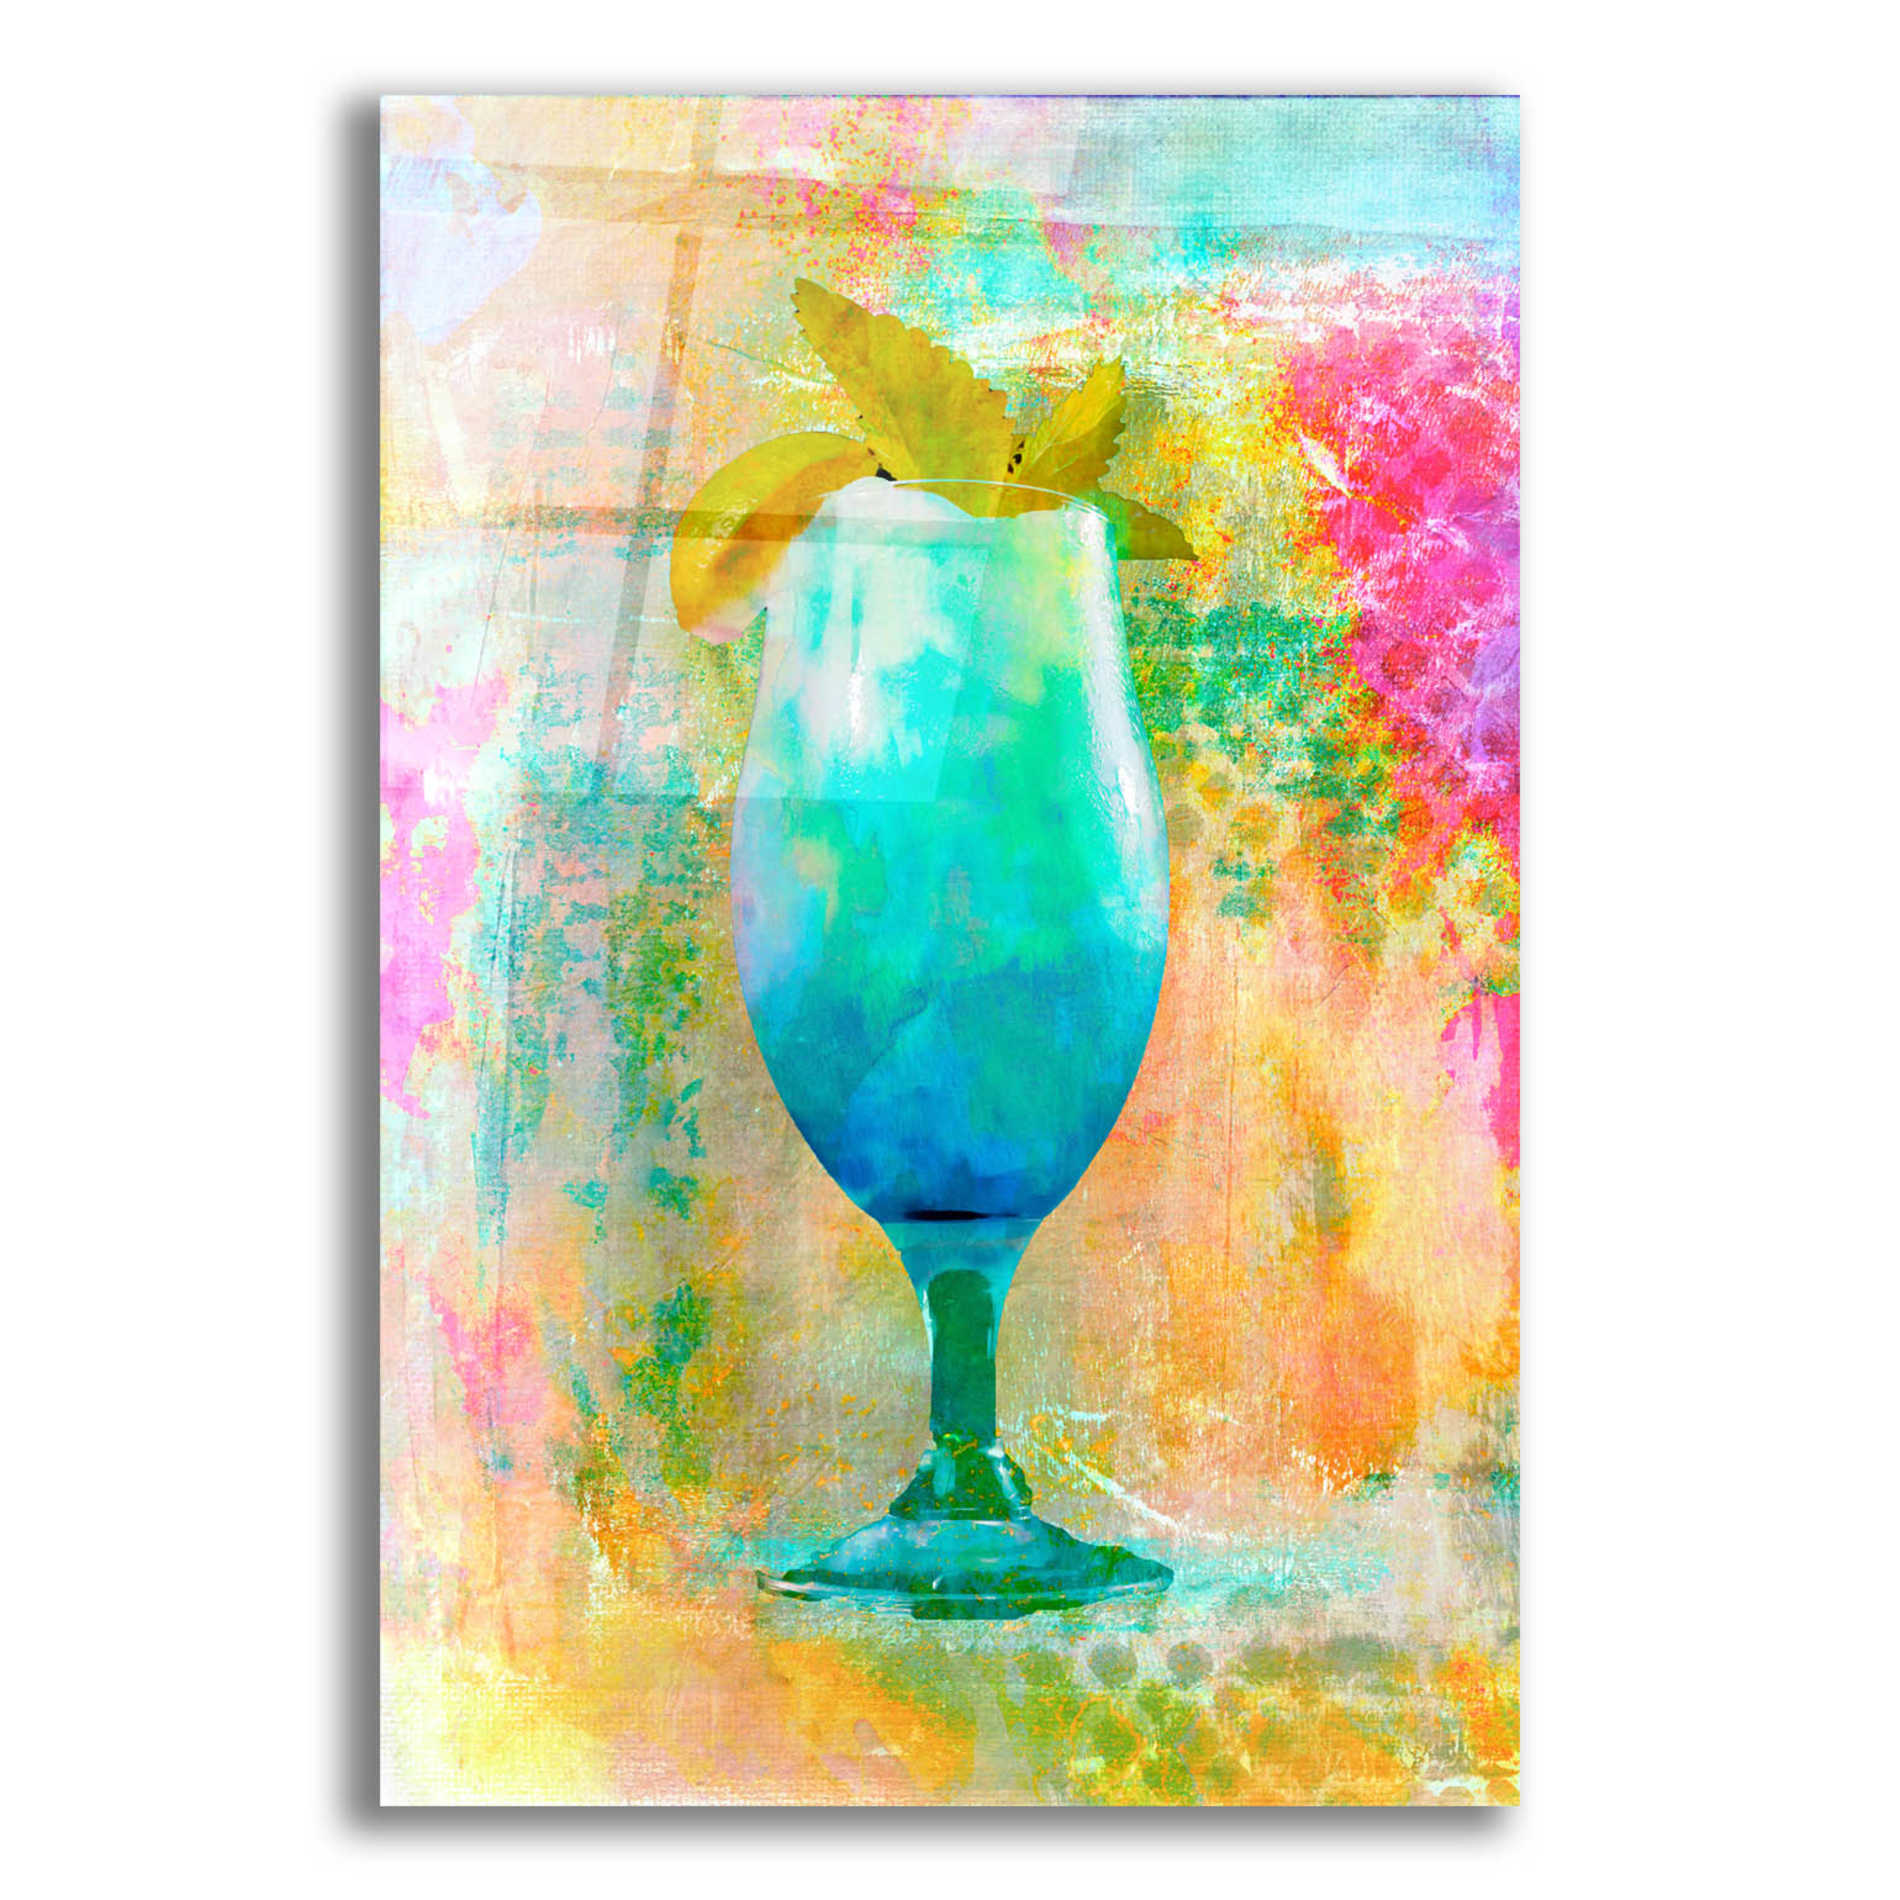 Epic Art 'Cocktail Night' by Andrea Haase Acrylic Glass Wall Art,12x16